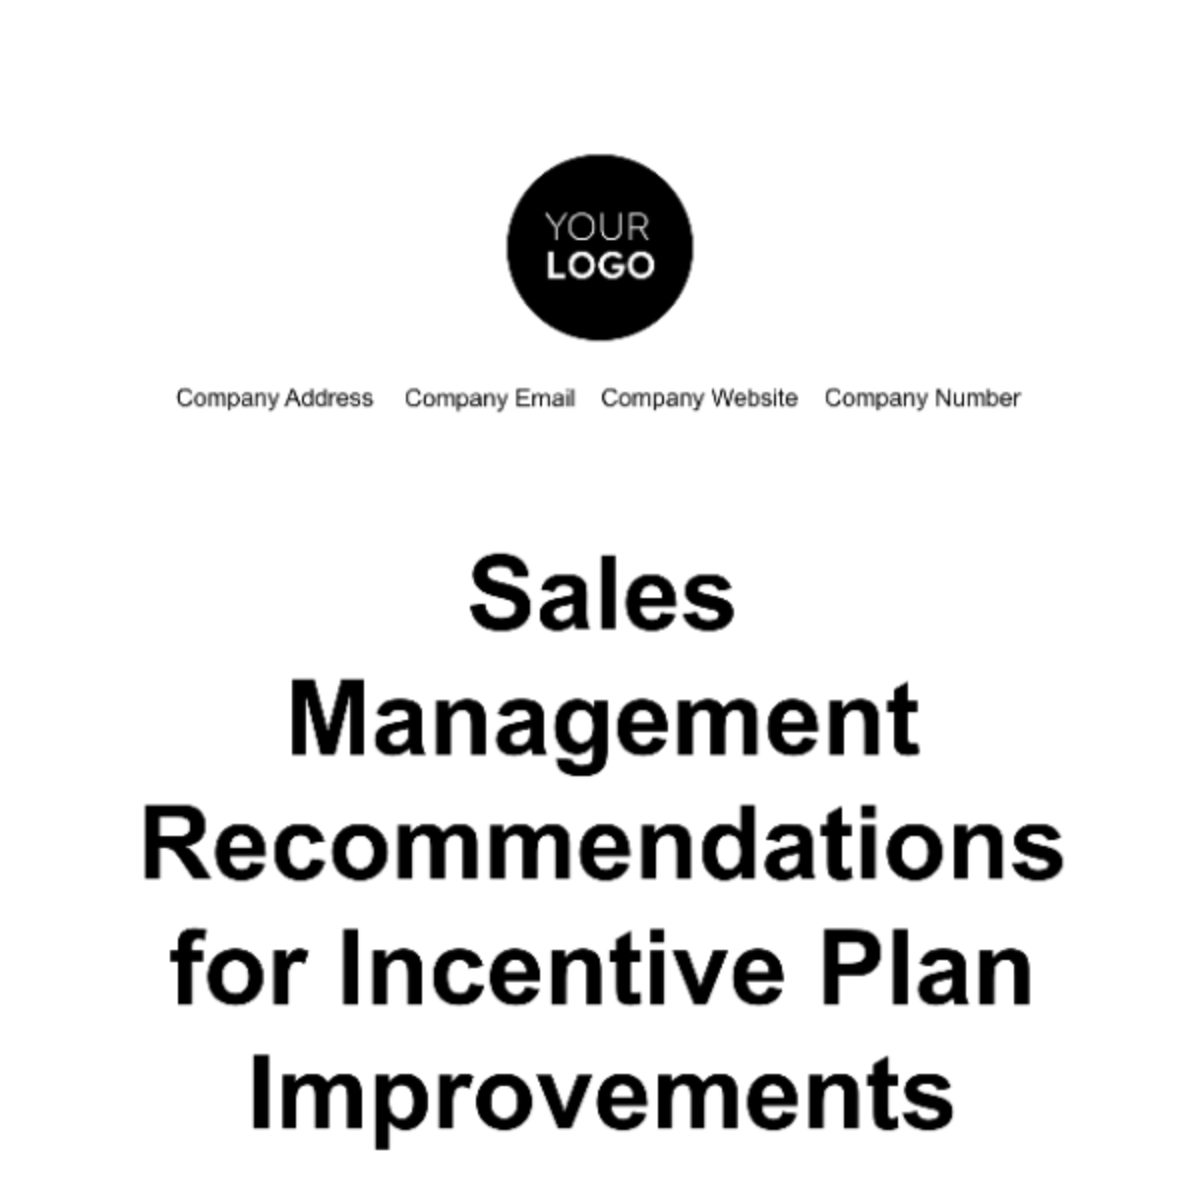 Free Sales Management Recommendations for Incentive Plan Improvements Template